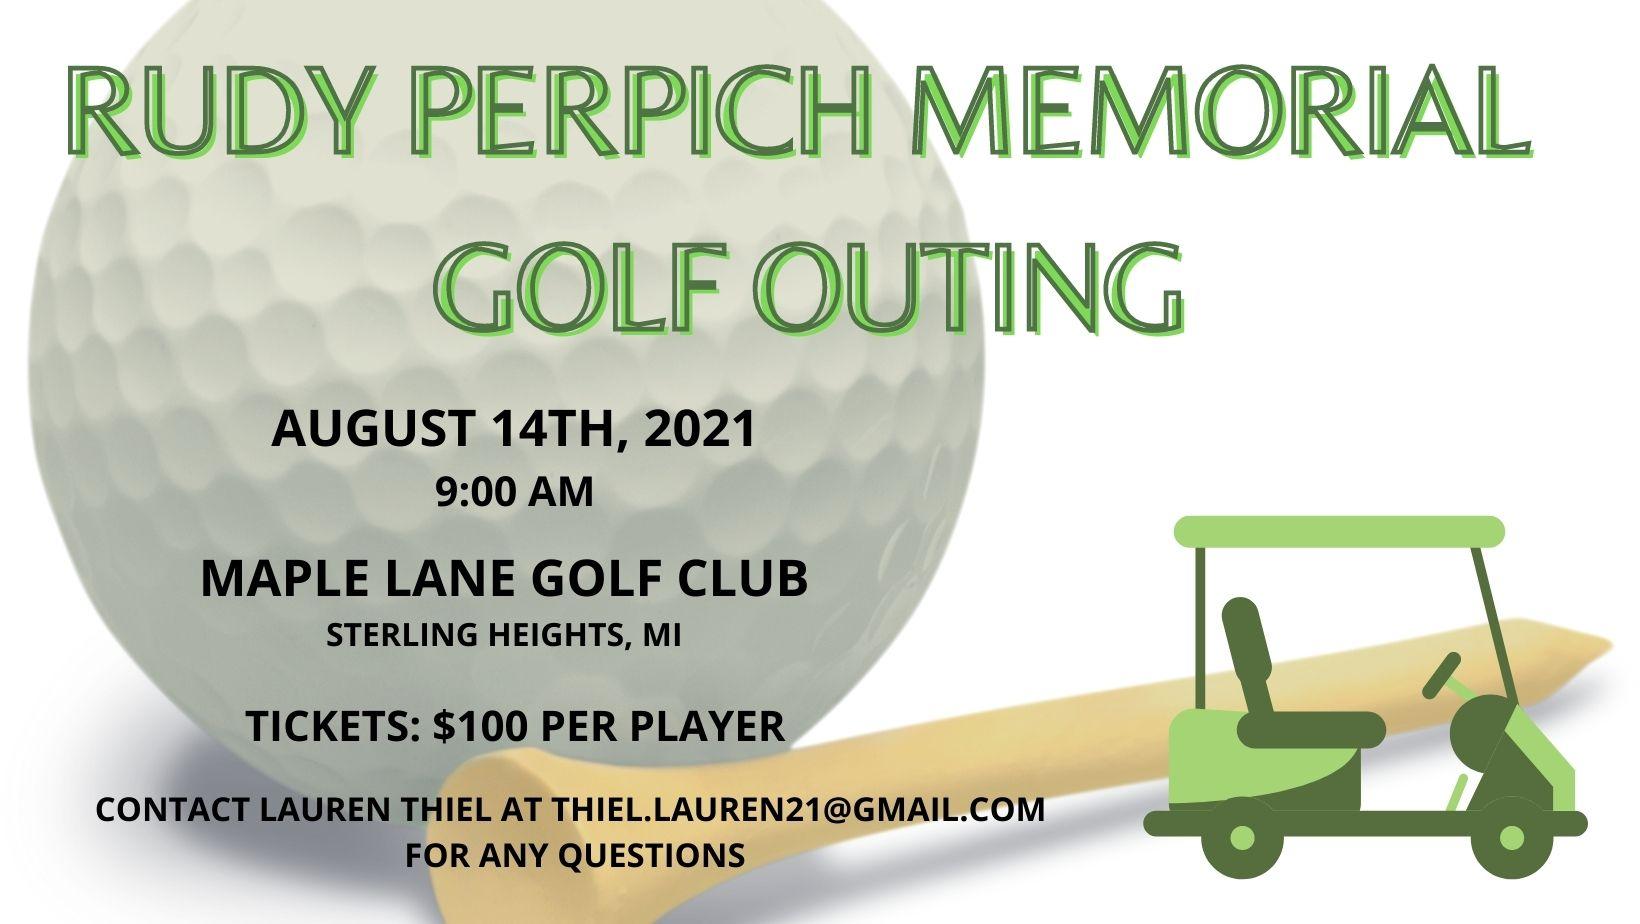 Rudy Perpich Memorial Golf Outing 2021